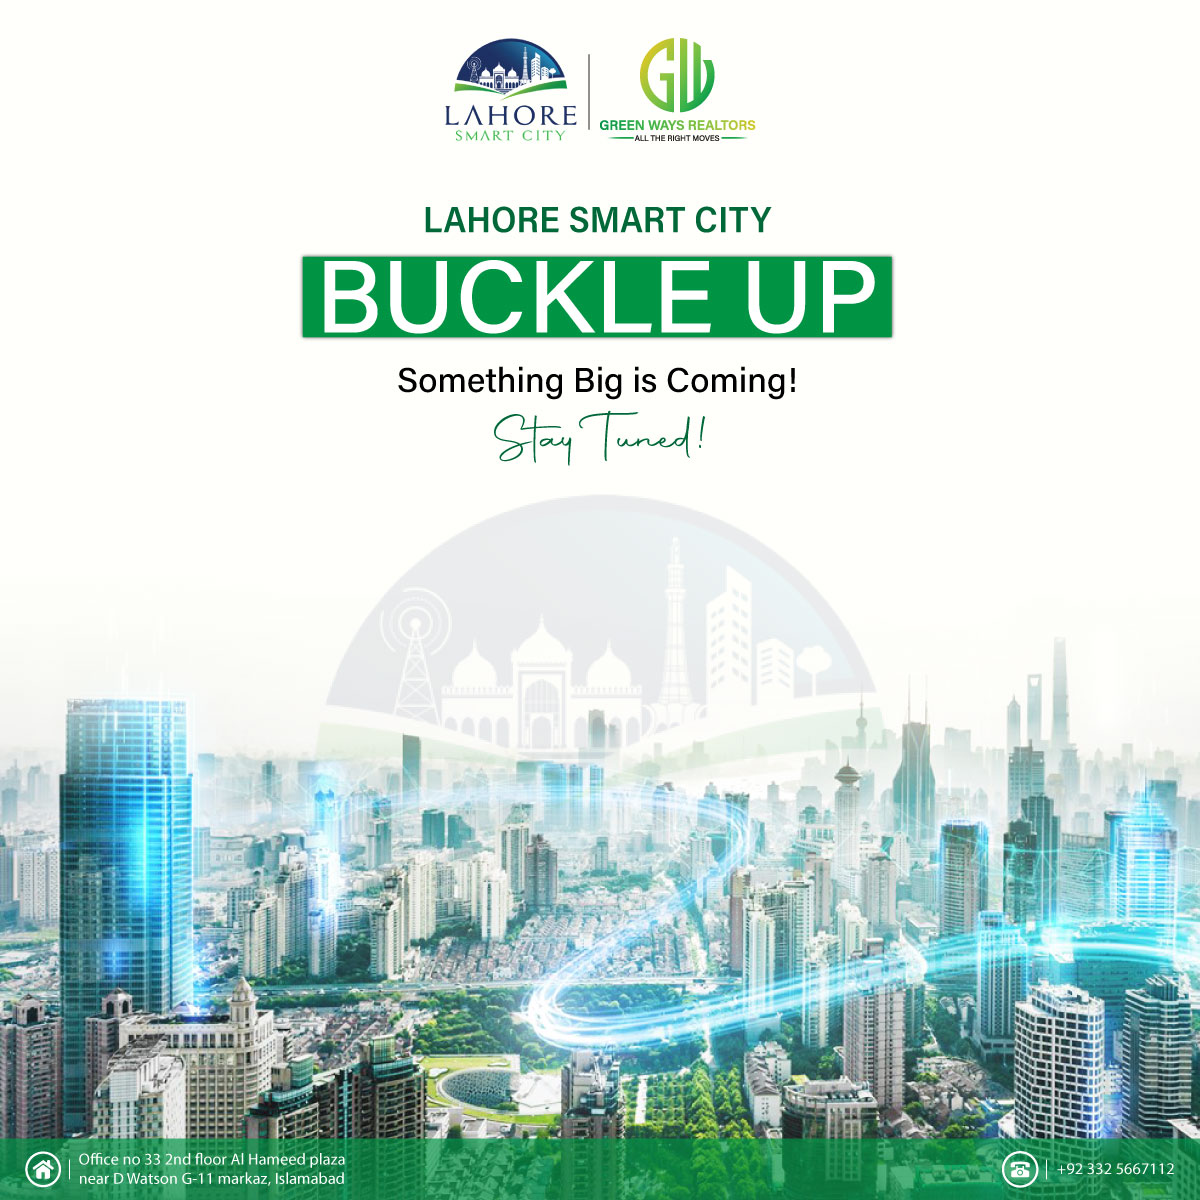 RT @Green_Ways_: Lahore Smart City!
Something big is coming.
Stay tuned!
#SmartCity #lahoresmartcity #comingsoon #greenwaysrealtors